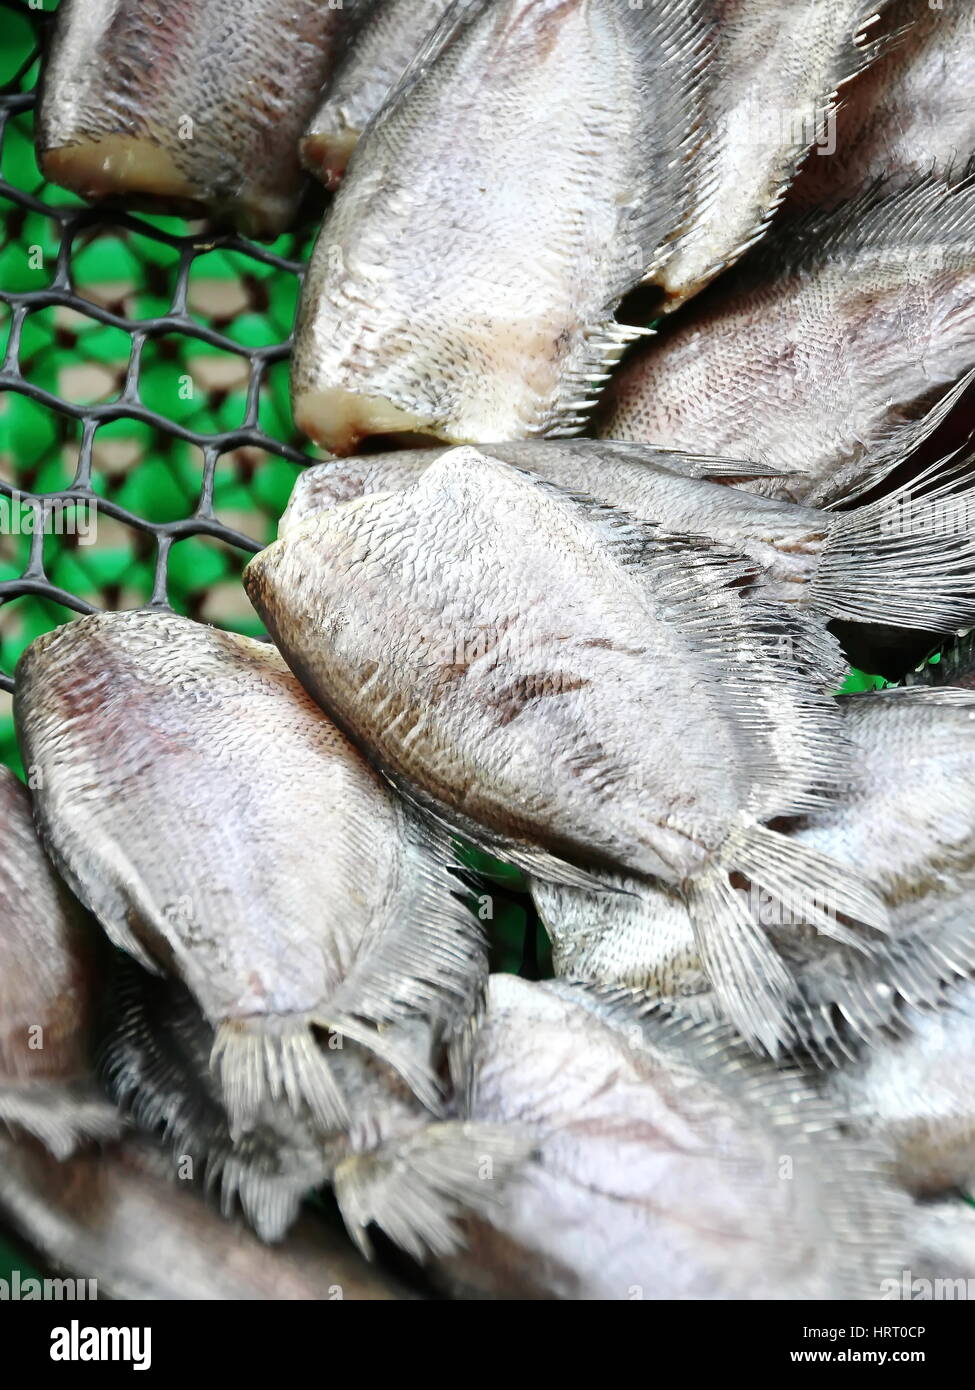 Dried Salted Fish - Snakeskin gourami in the Food Market in Thailand Stock Photo